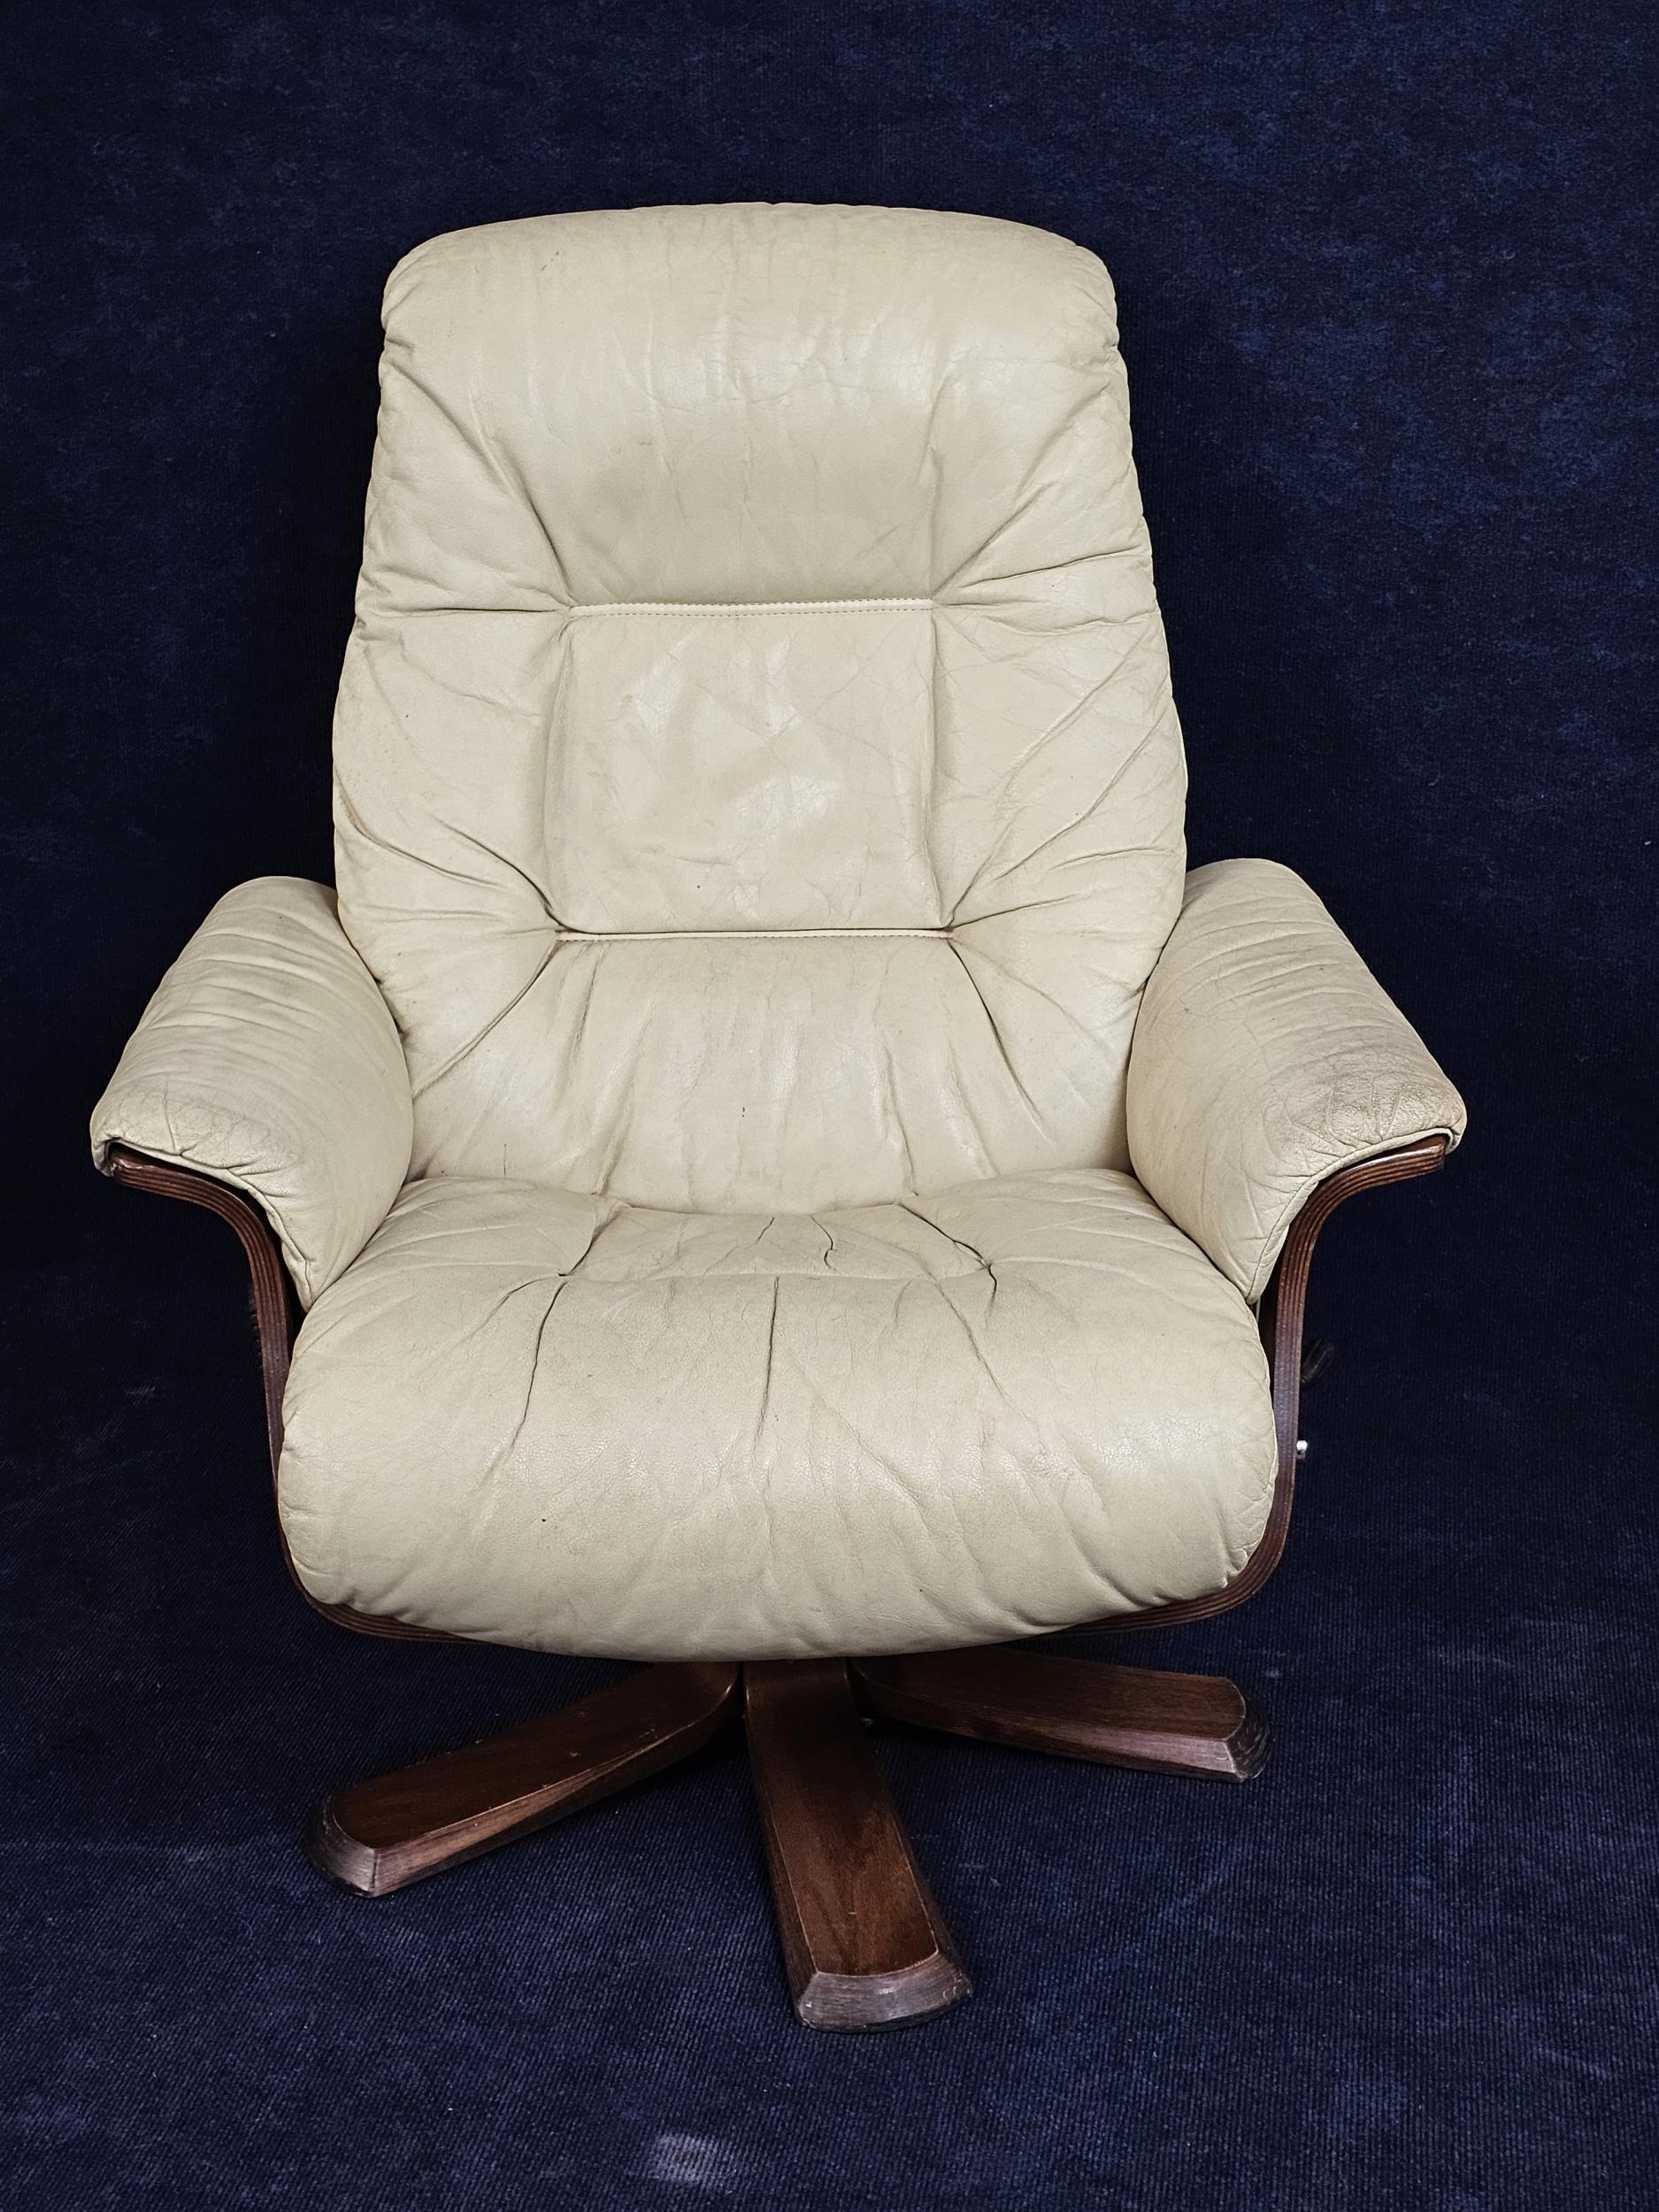 A contemporary Scandinavian leather upholstered armchair with reclining swivel action.